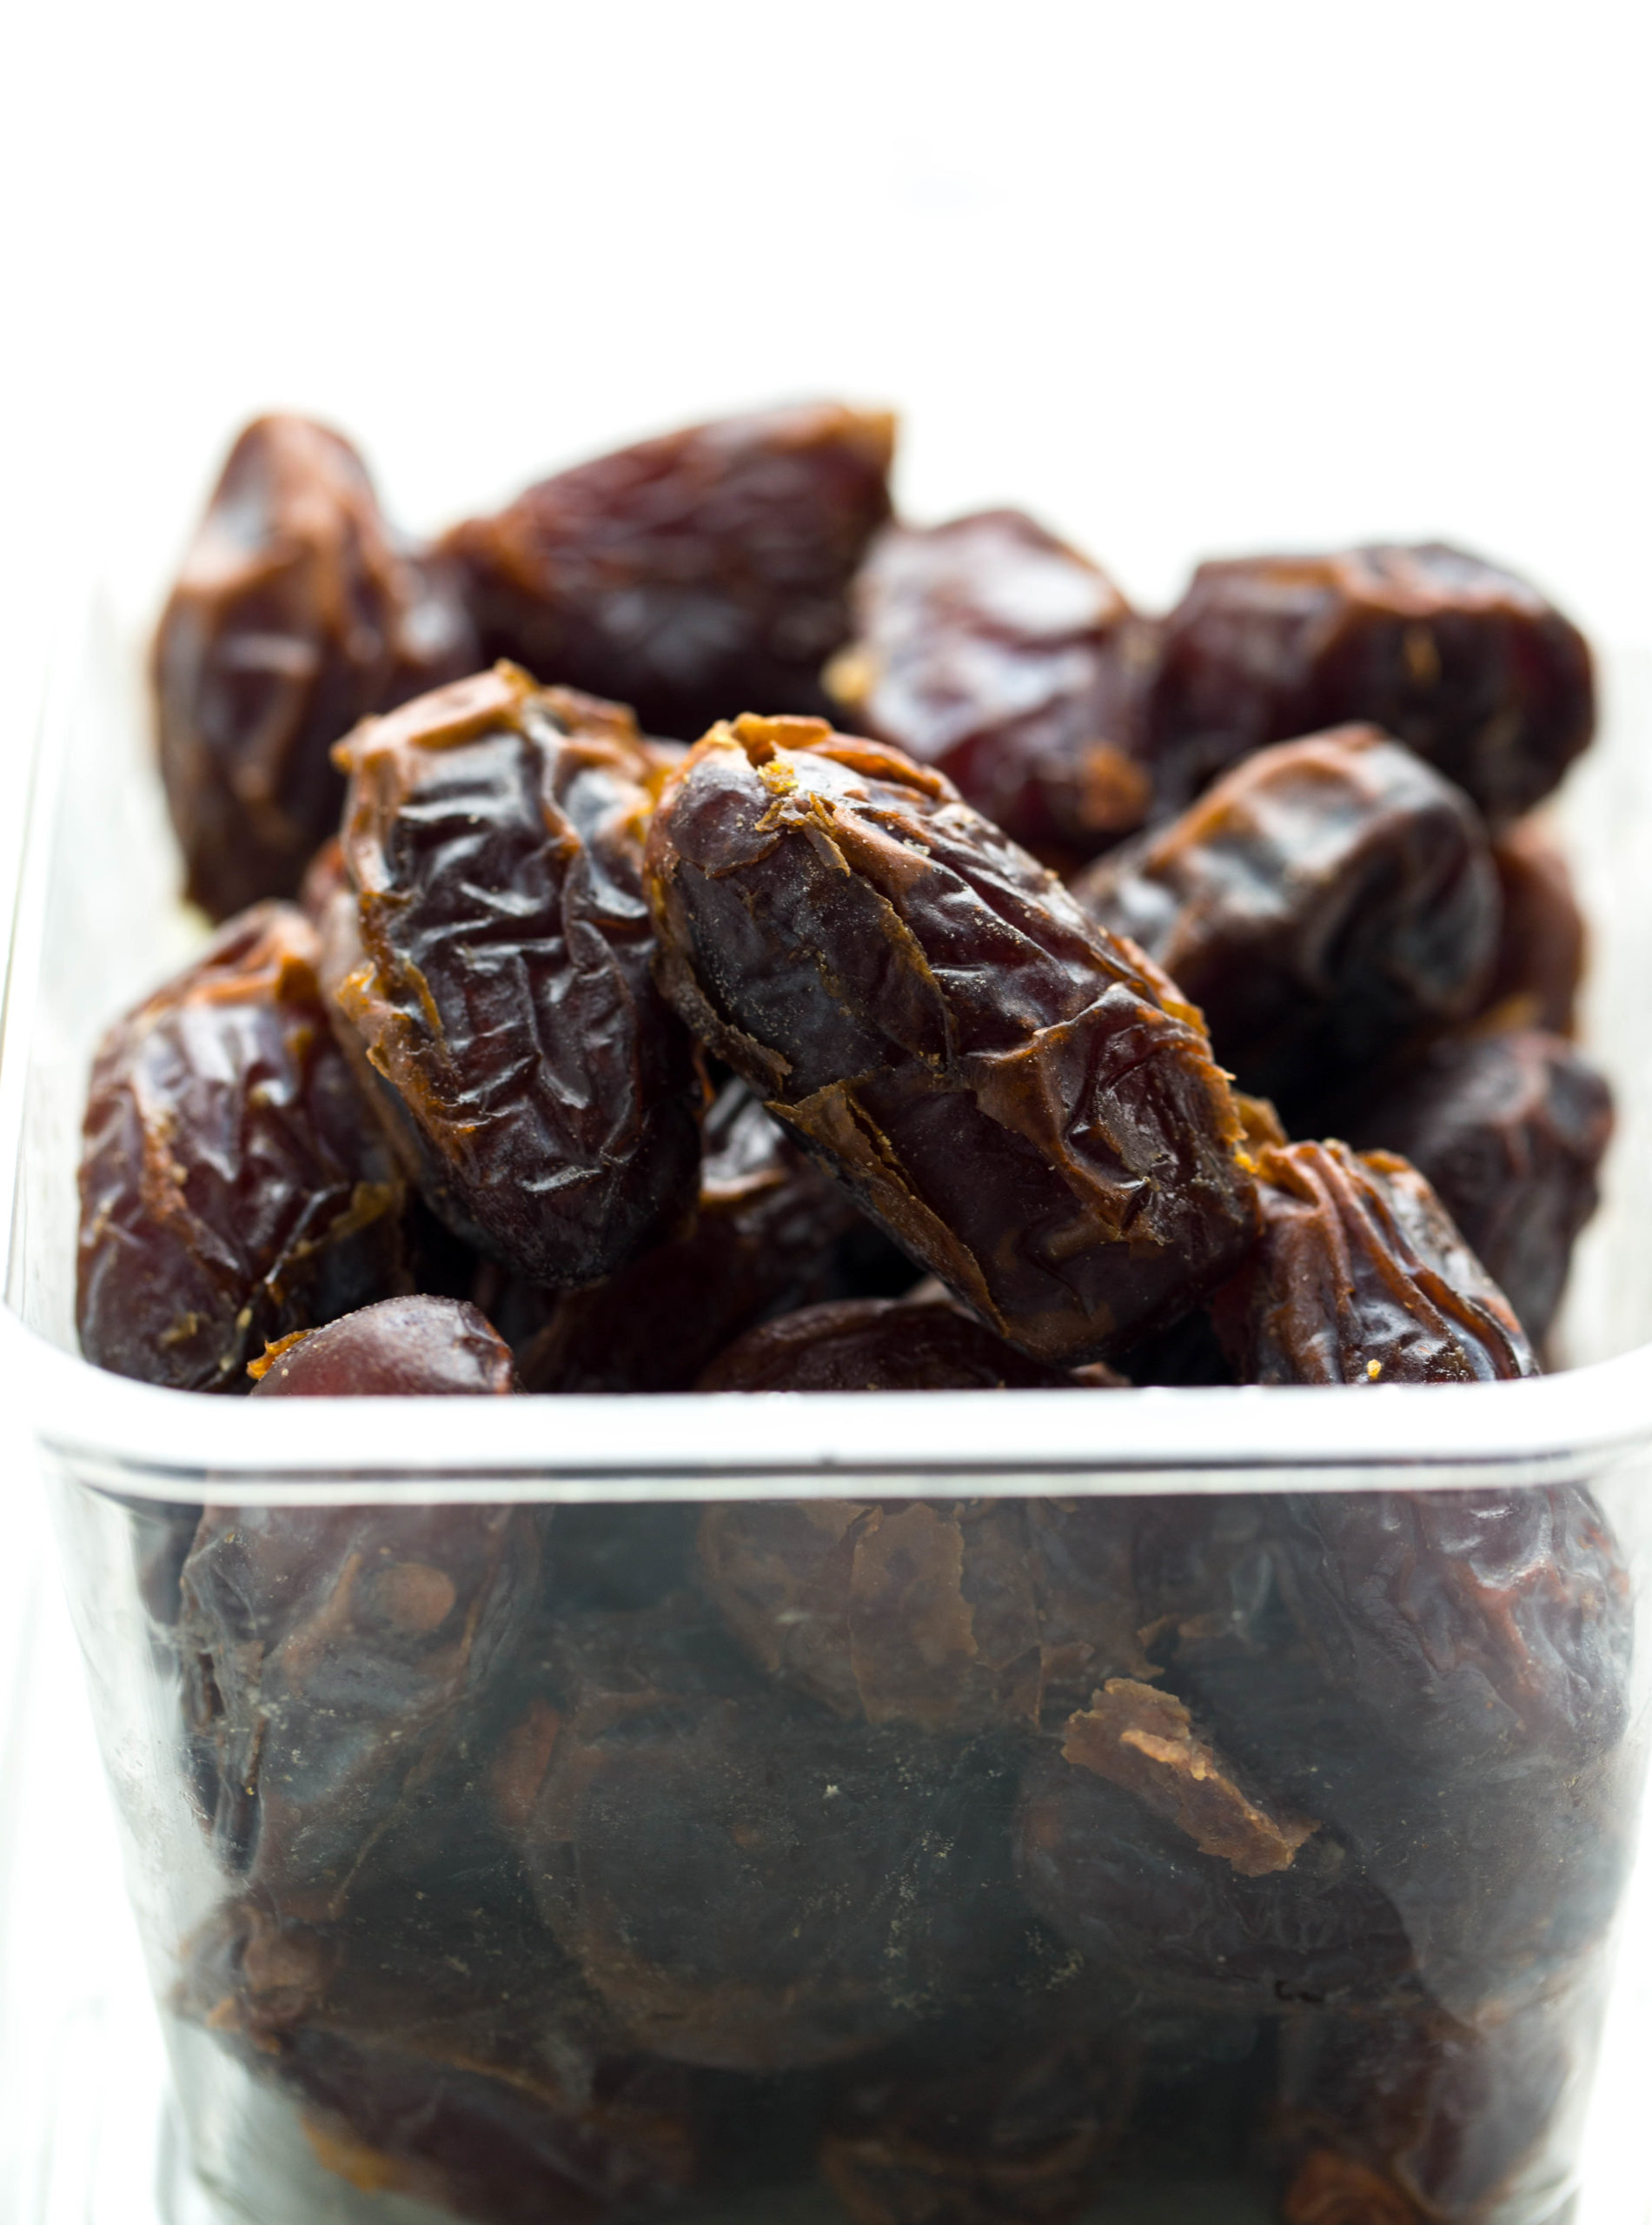 MEDJOOL DATES IN CONTAINER